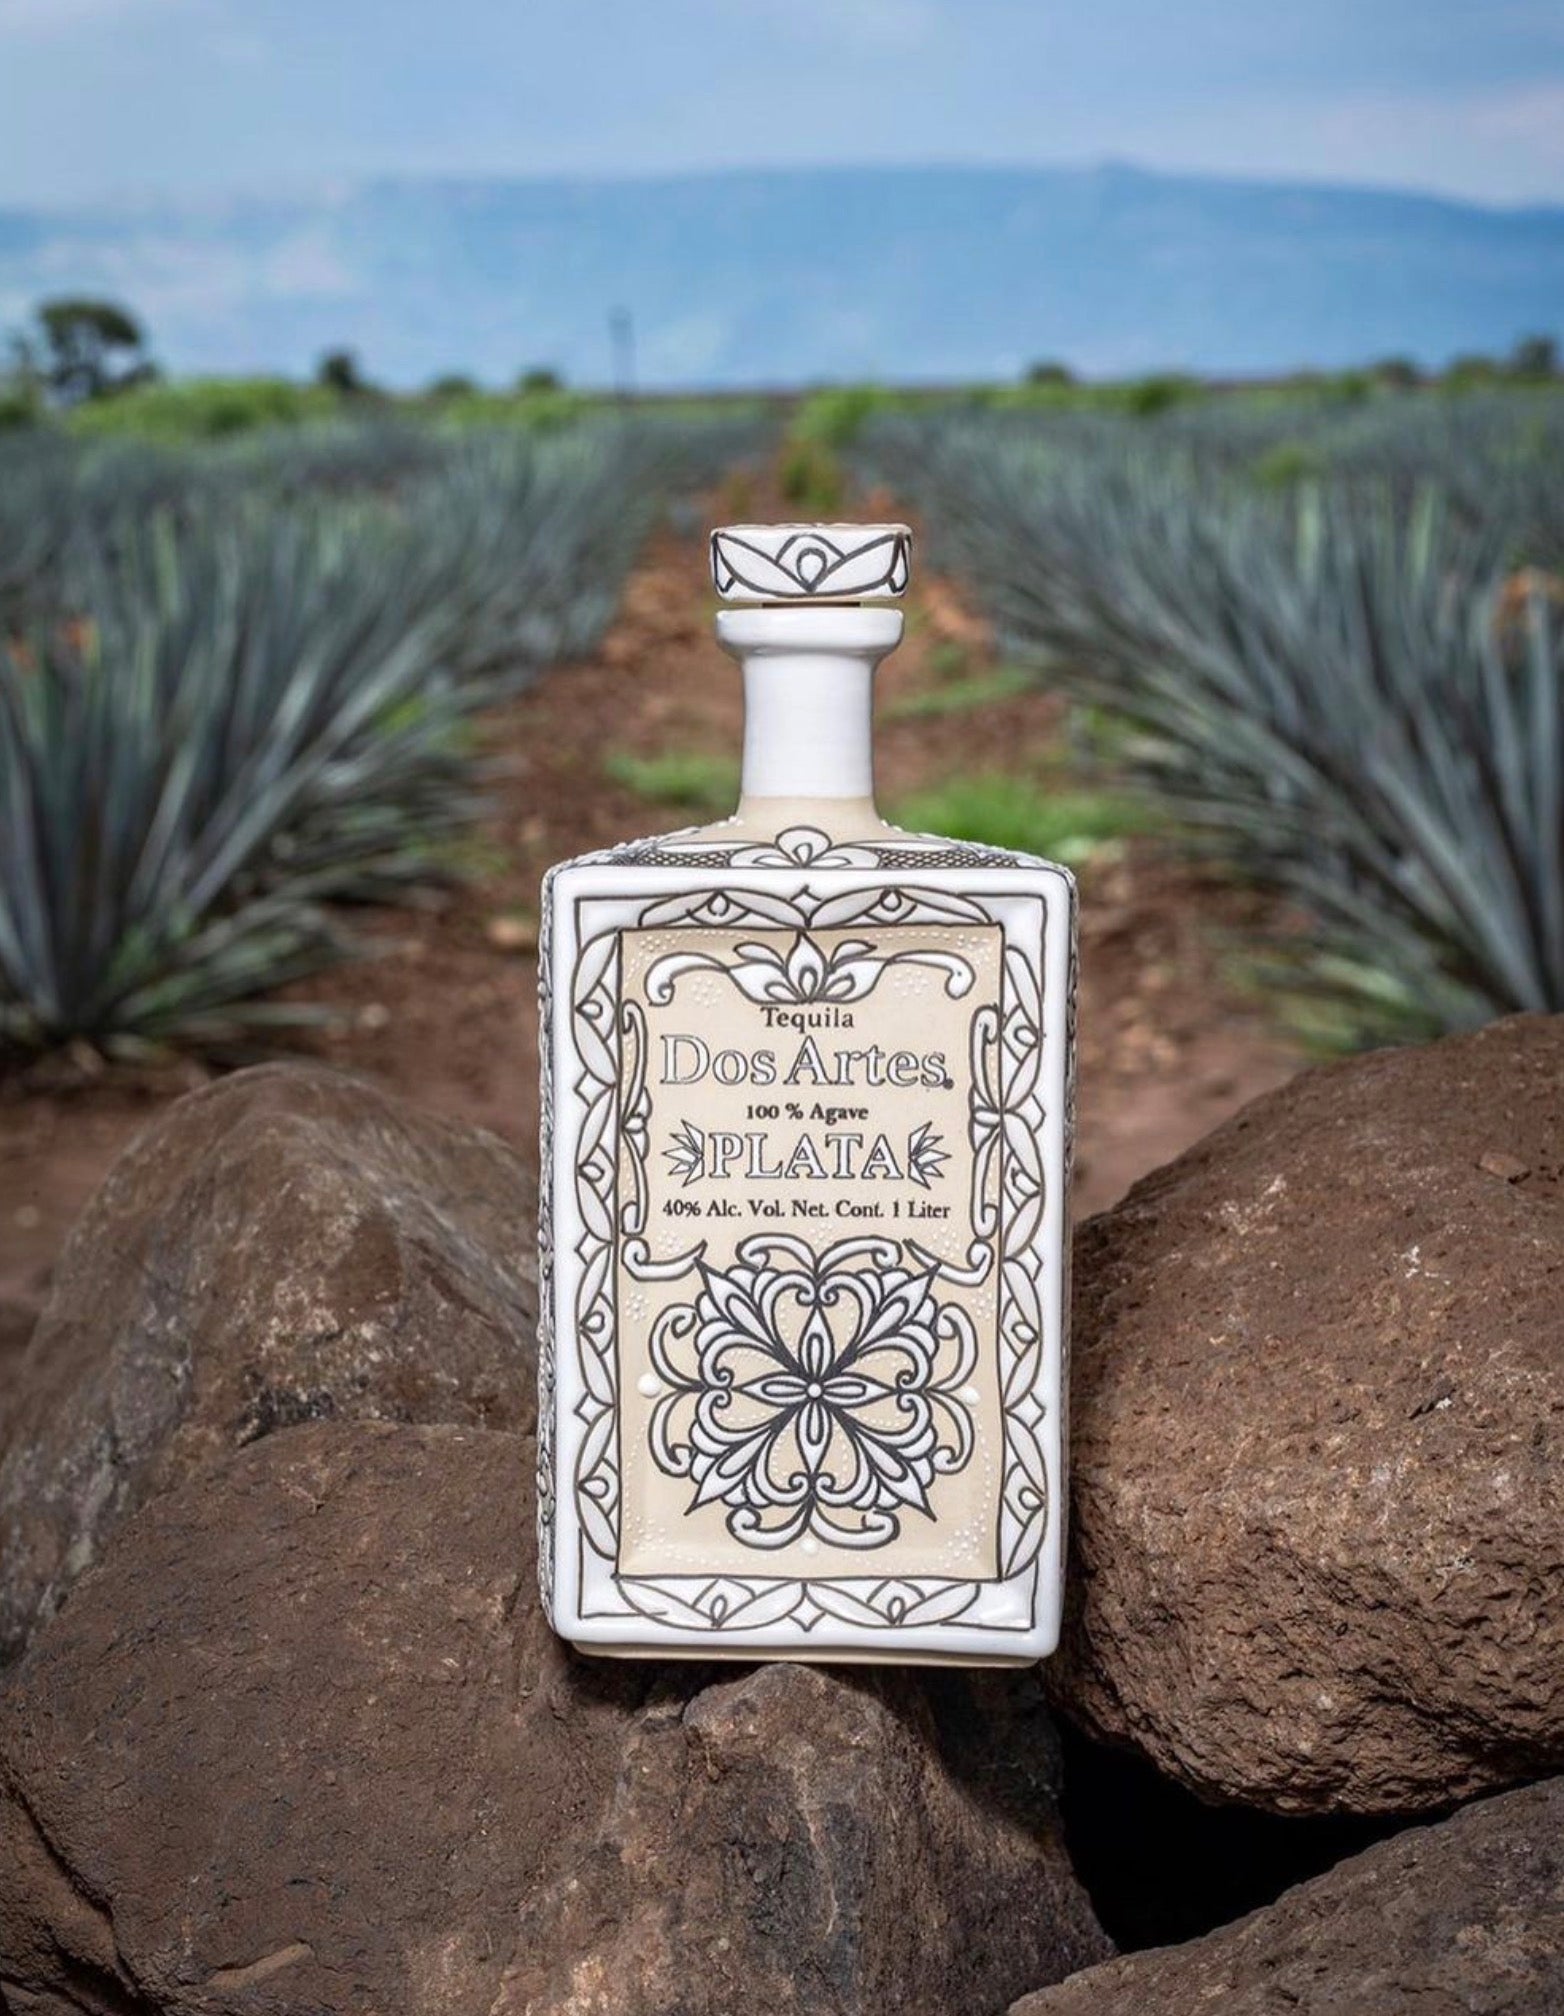 Dos Artes Plata Tequila (Limited Edition)